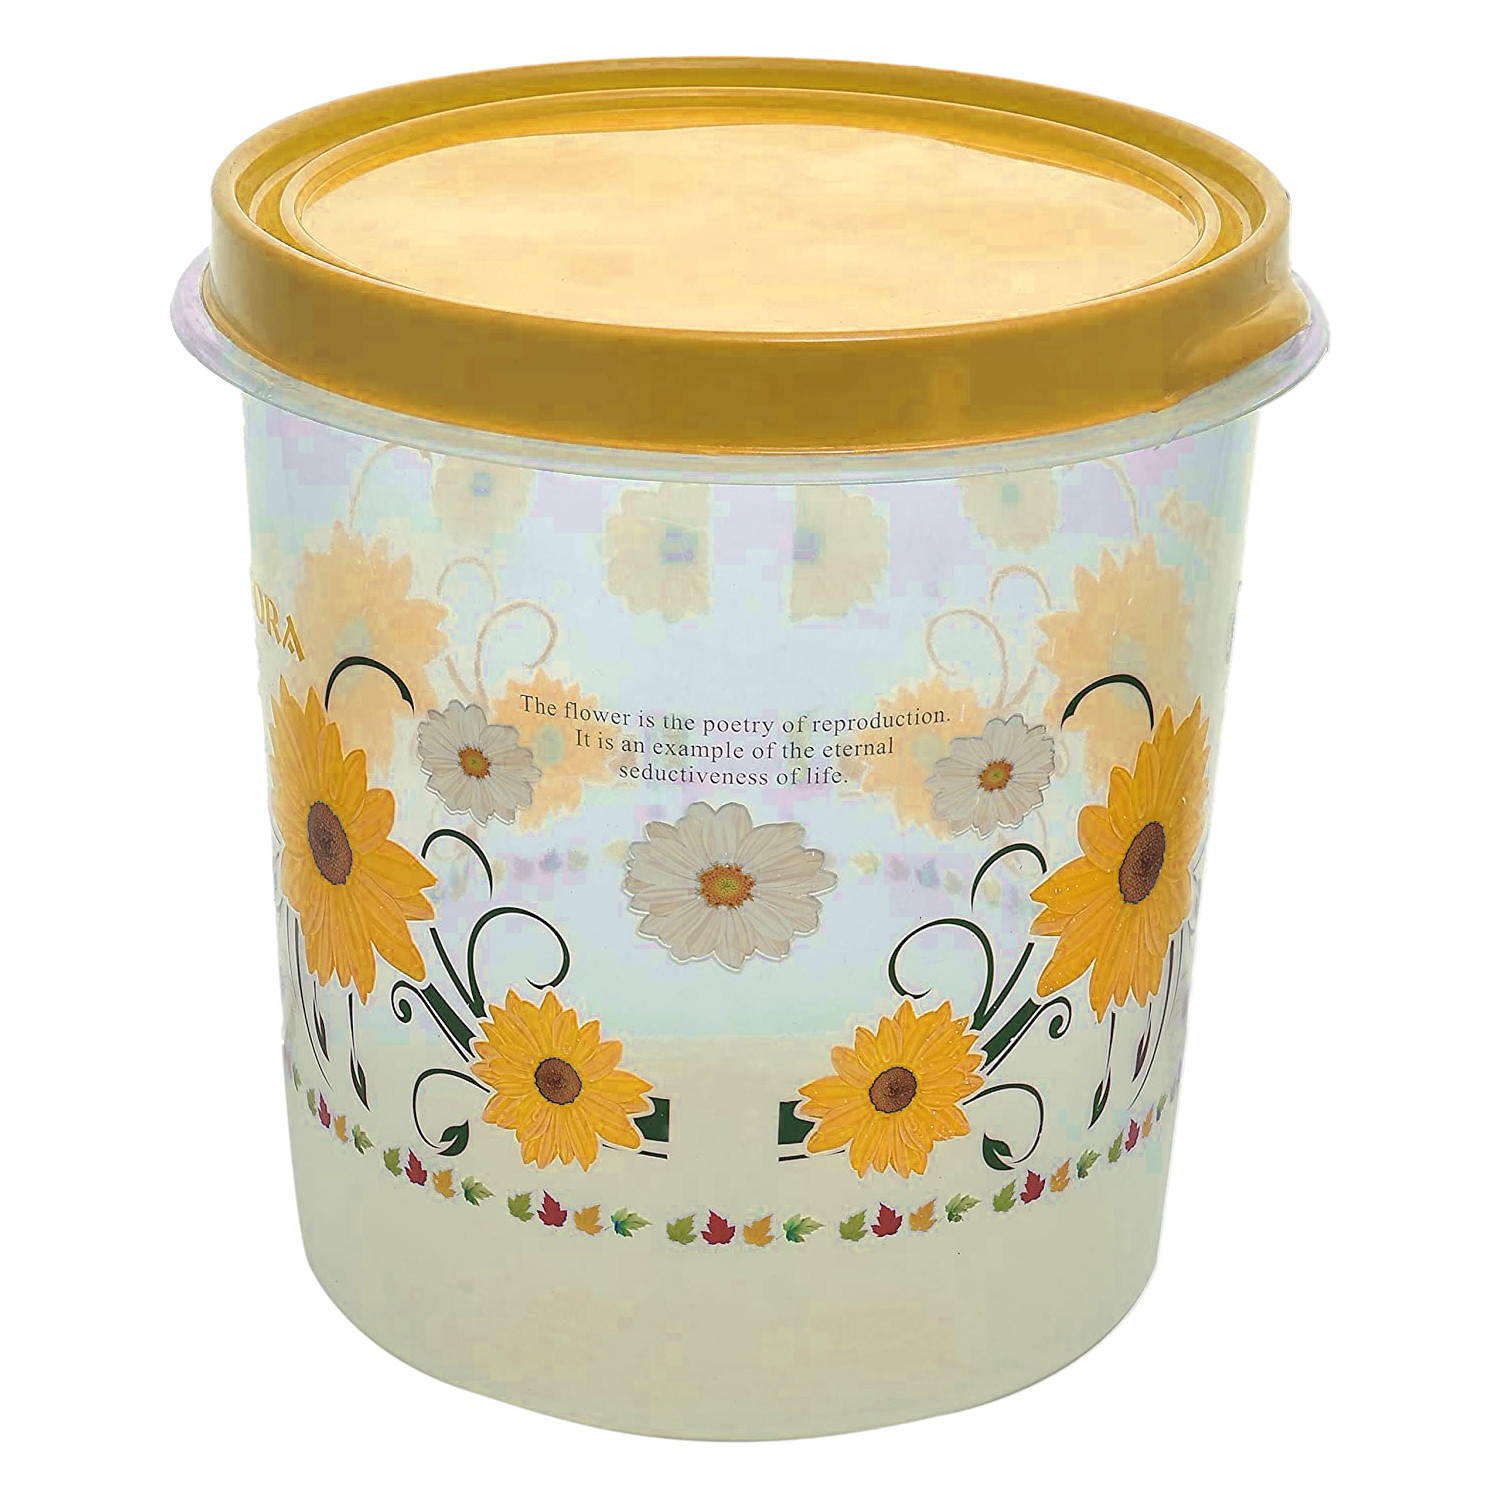 Kuber Industries Storage Container|Durable Plastic Floral Design BPA Free Food Kitchen Organizer With Lid|Food Utility Jar, 5 Ltr (Yellow)